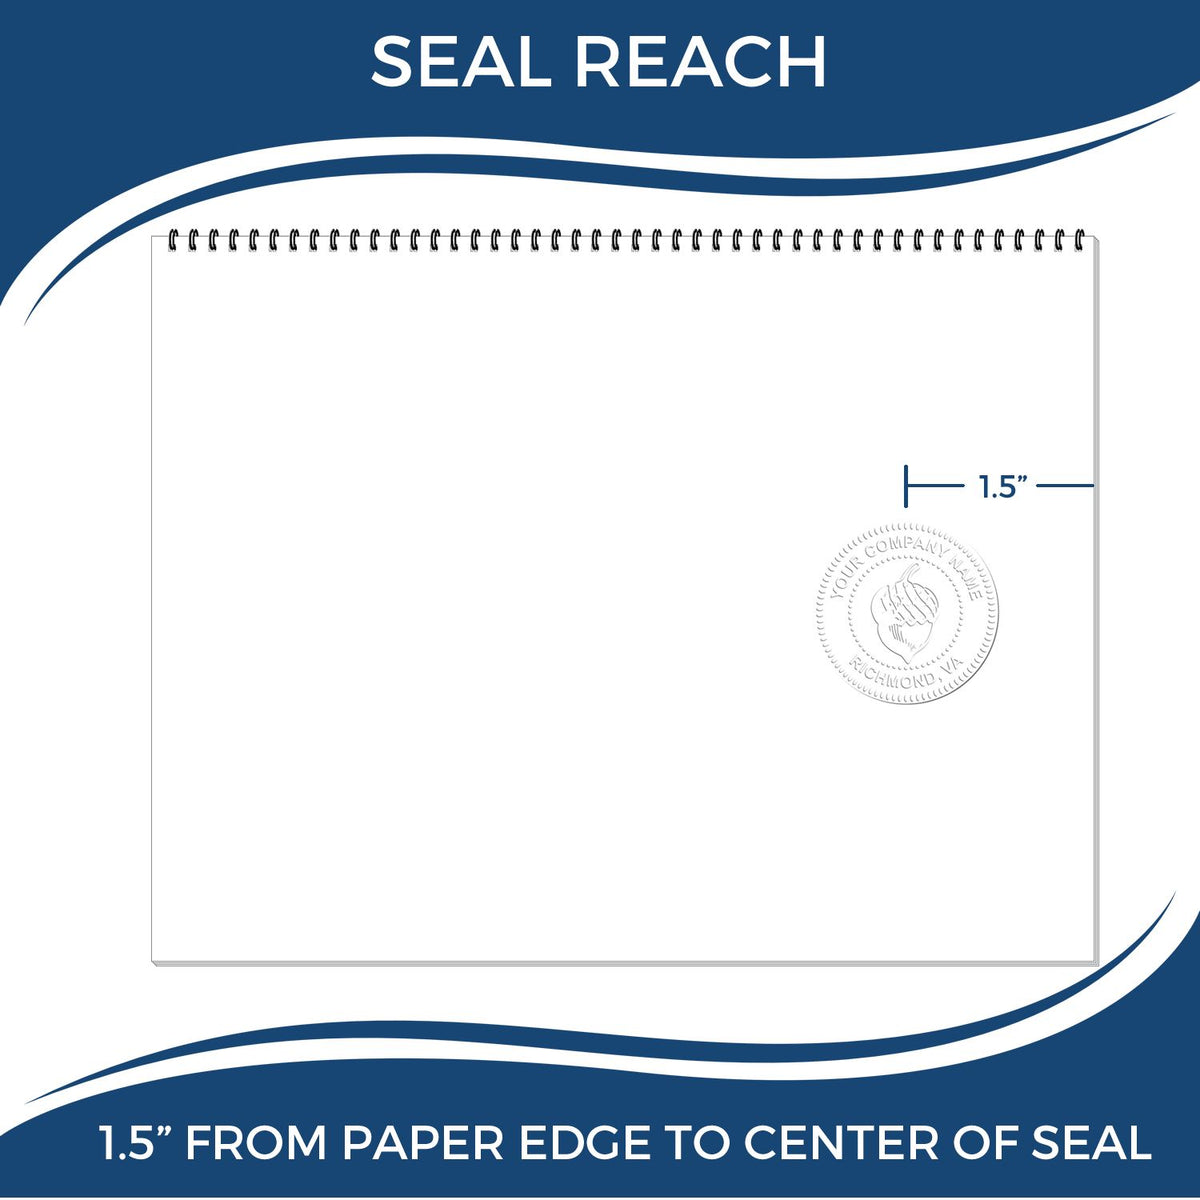 An infographic showing the seal reach which is represented by a ruler and a miniature seal image of the Gift Nevada Architect Seal